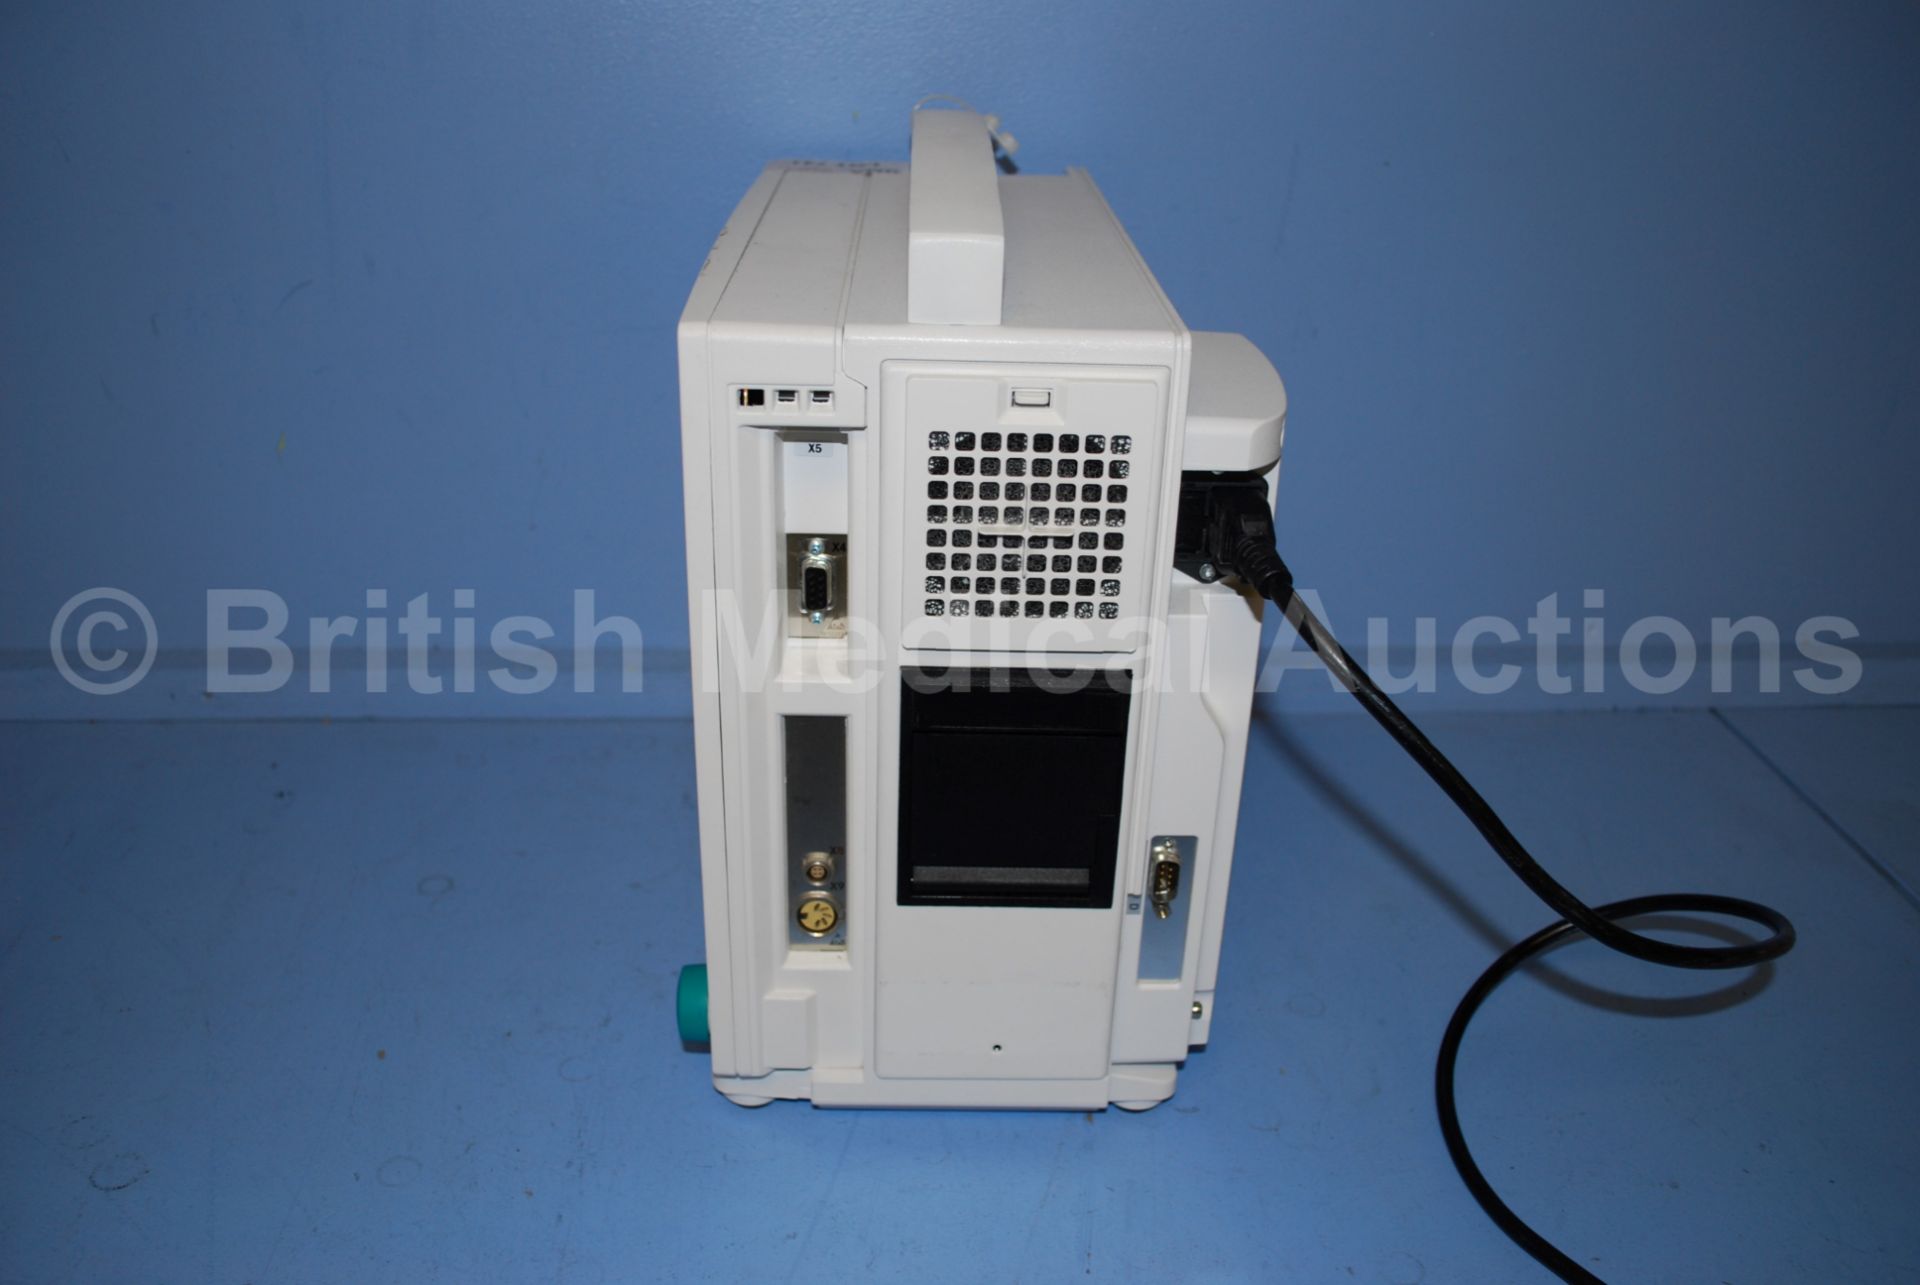 Datex Ohmeda S/5 Compact Anaesthesia Monitor with - Image 4 of 6